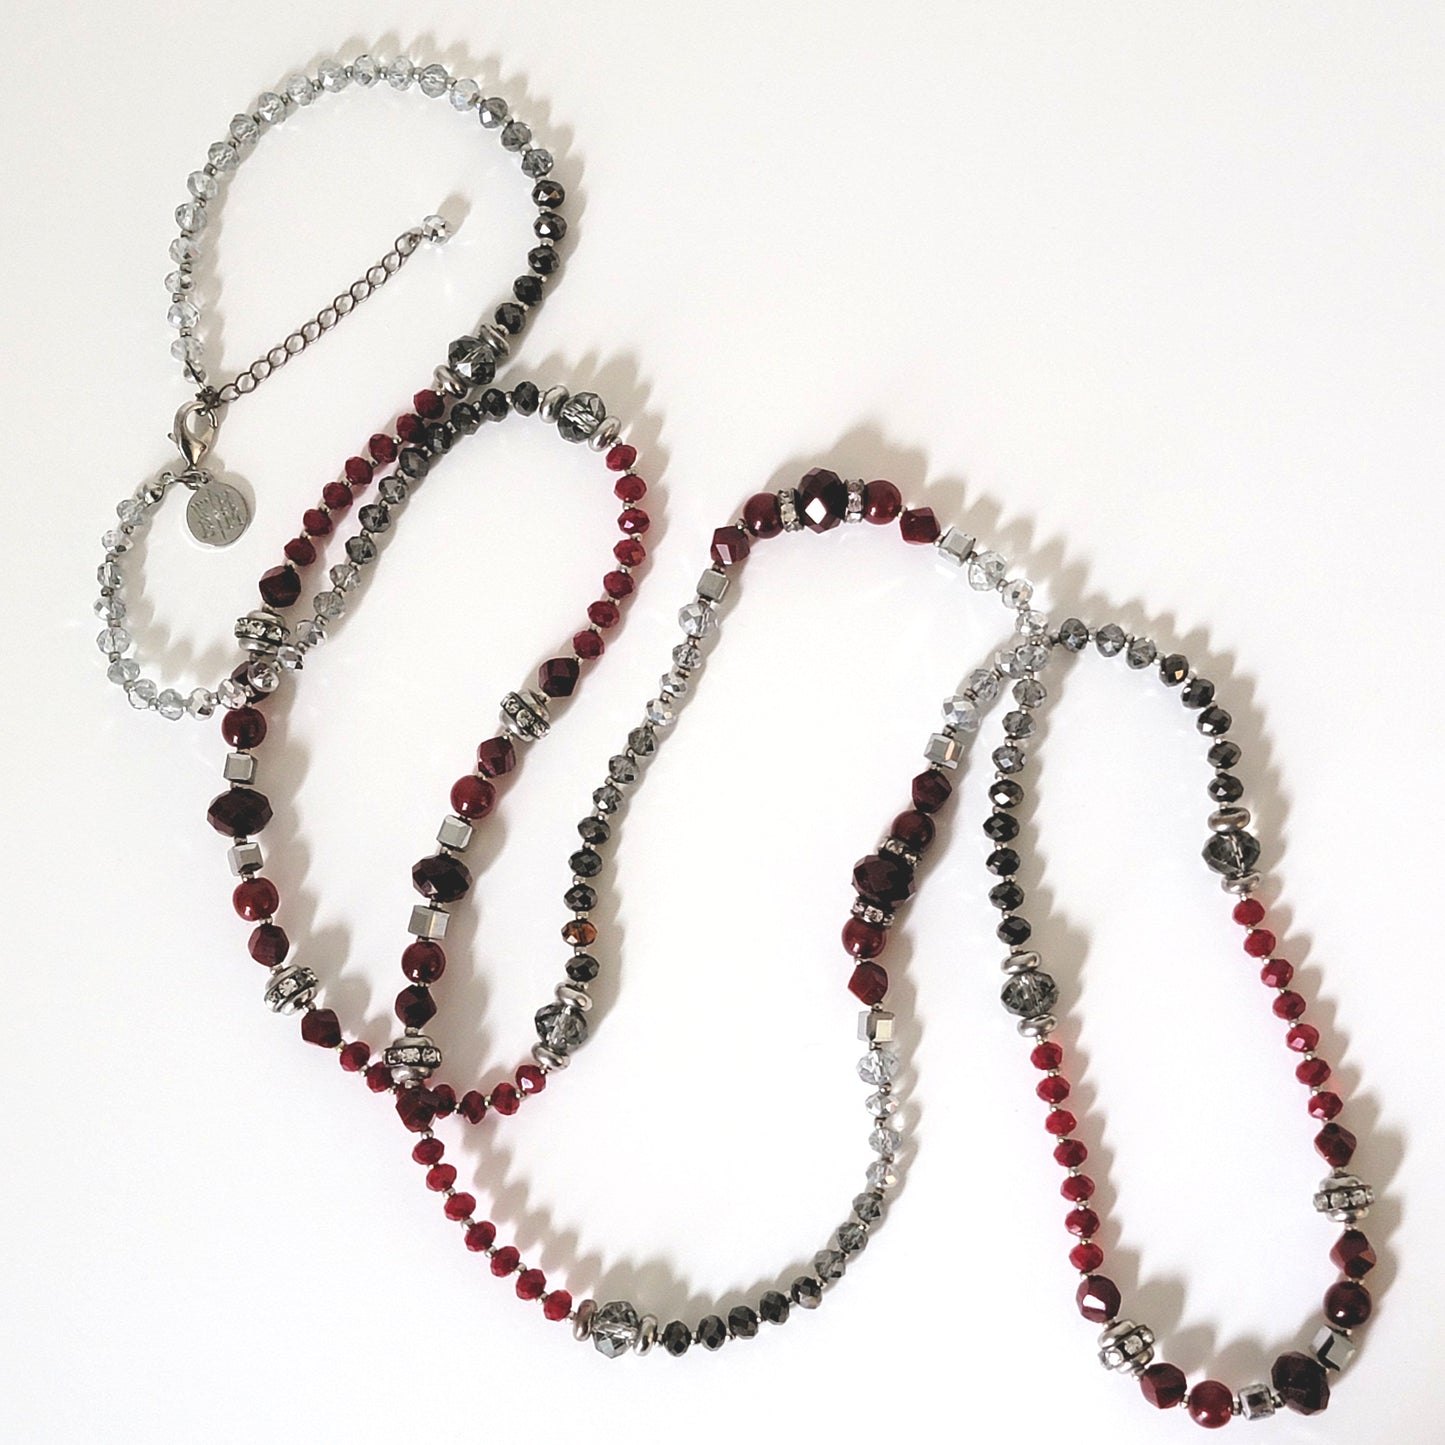 Long red and silver beaded necklace.